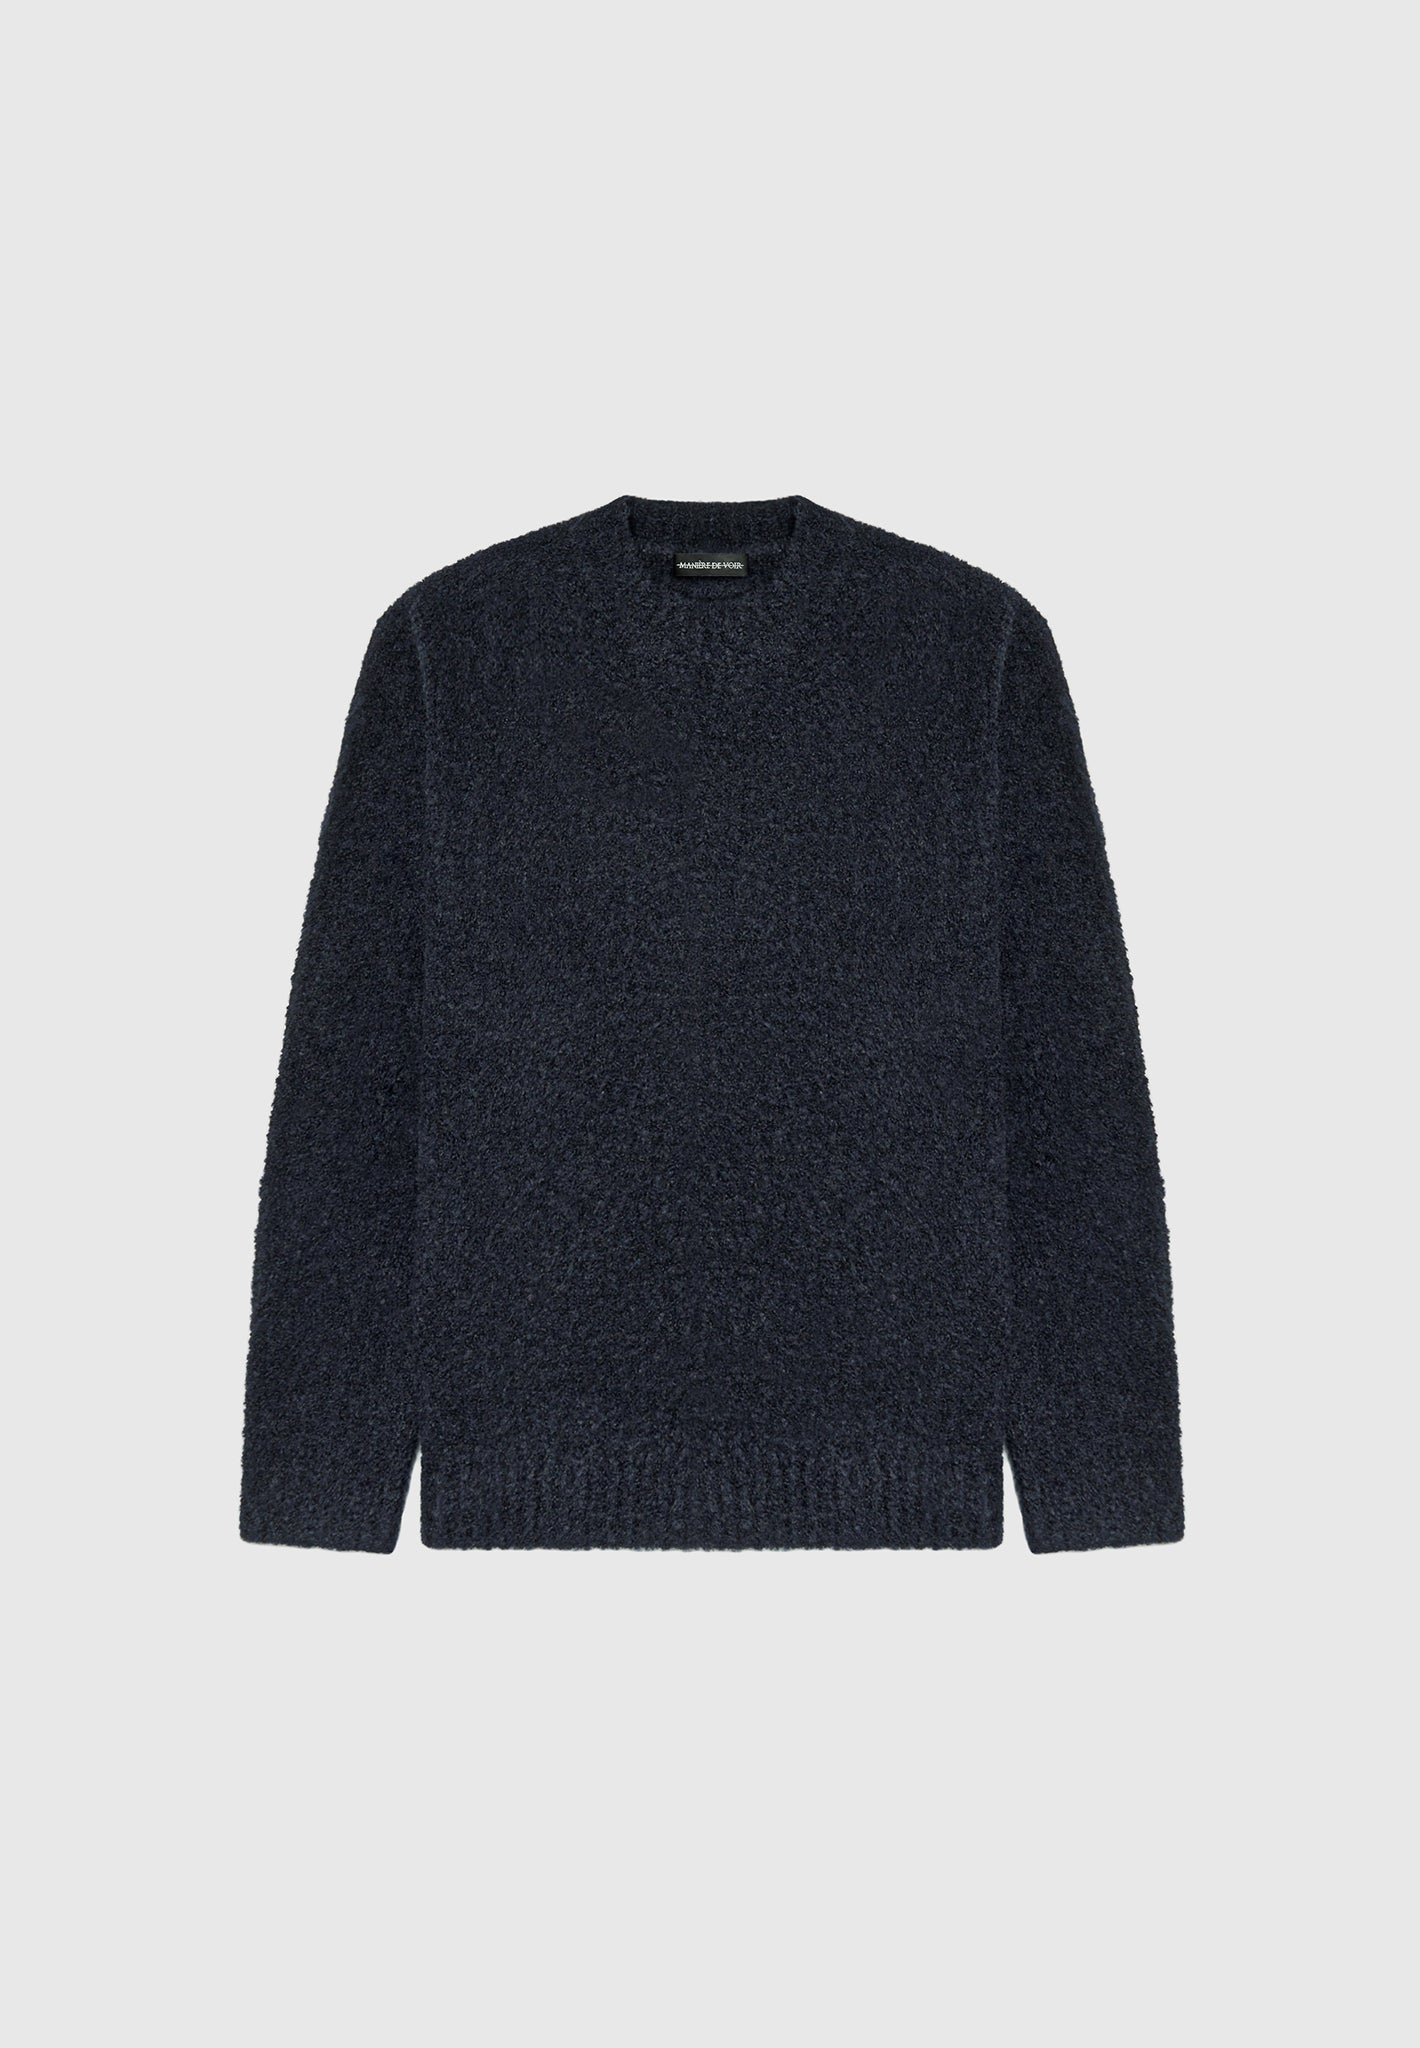 Acrylic and Mohair Wool Blend Knit Bouclé in Navy